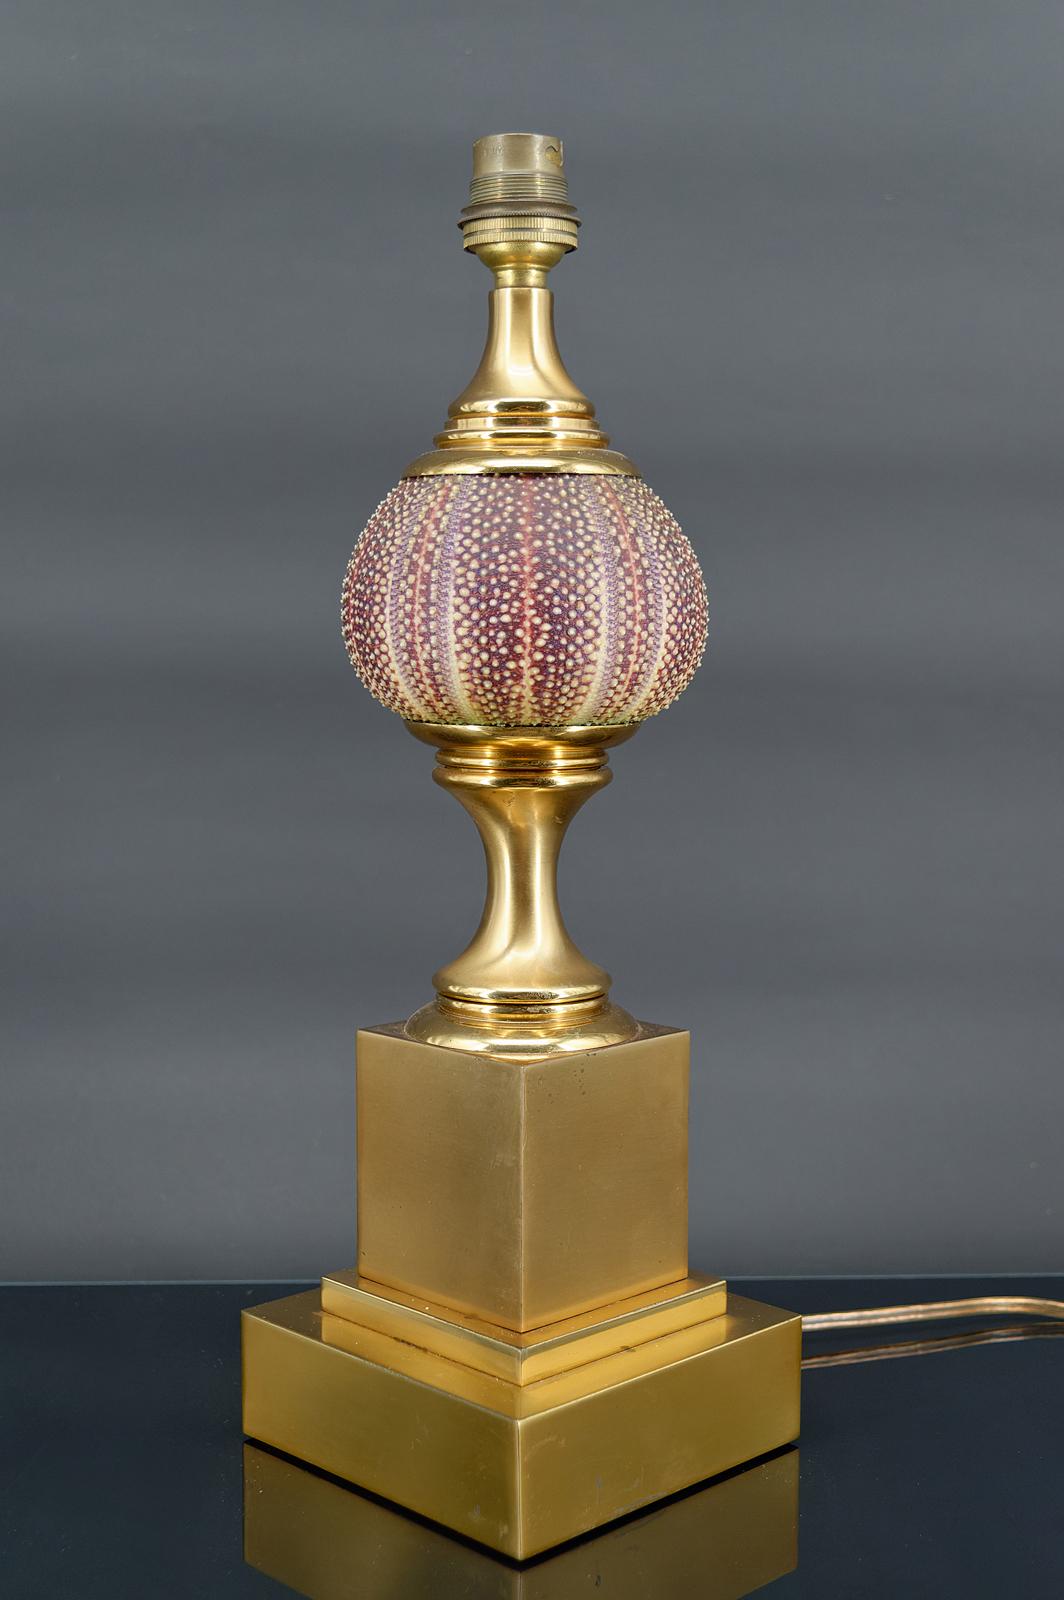 Maison Charles lamp, pink sea urchin and gilded bronze.

Hollywood Regency.

France, Circa 1960

In good condition, electricity OK.

Dimensions:
height 38 cm
diameter 12 cm